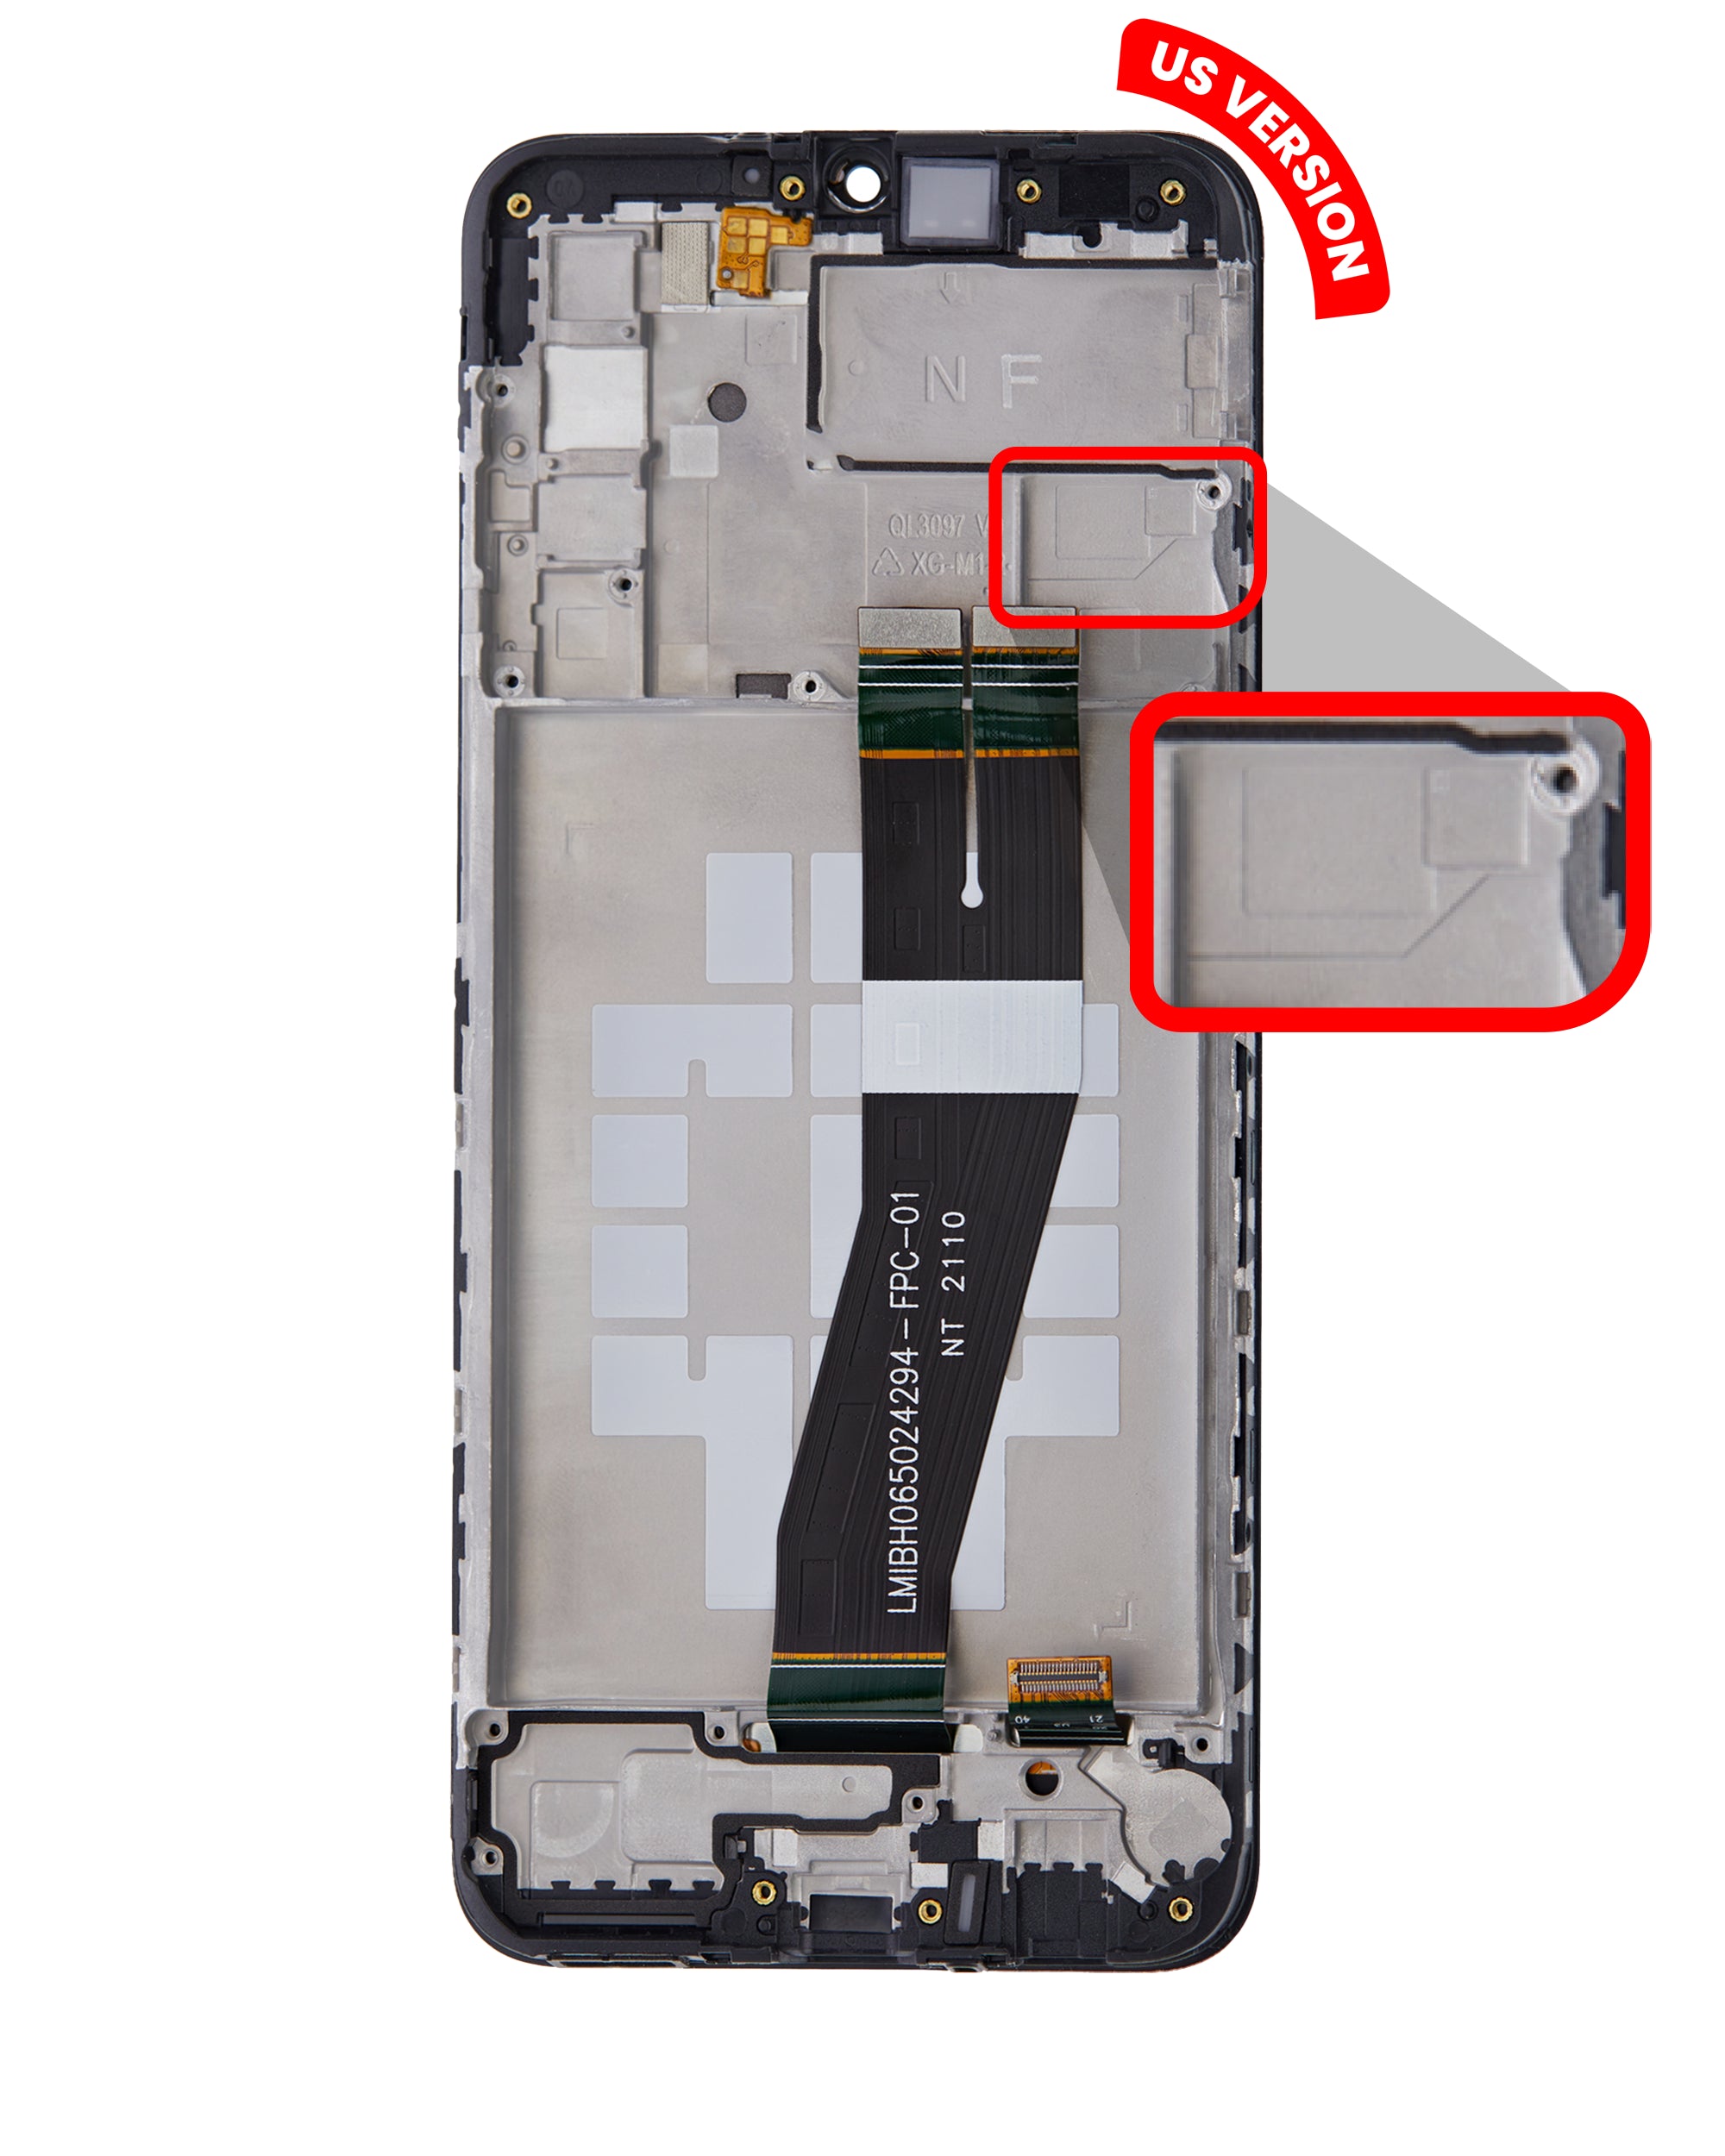 For Samsung Galaxy A02S (A025U / 2020) LCD Screen Replacement With Frame (US Version) (All Colors)